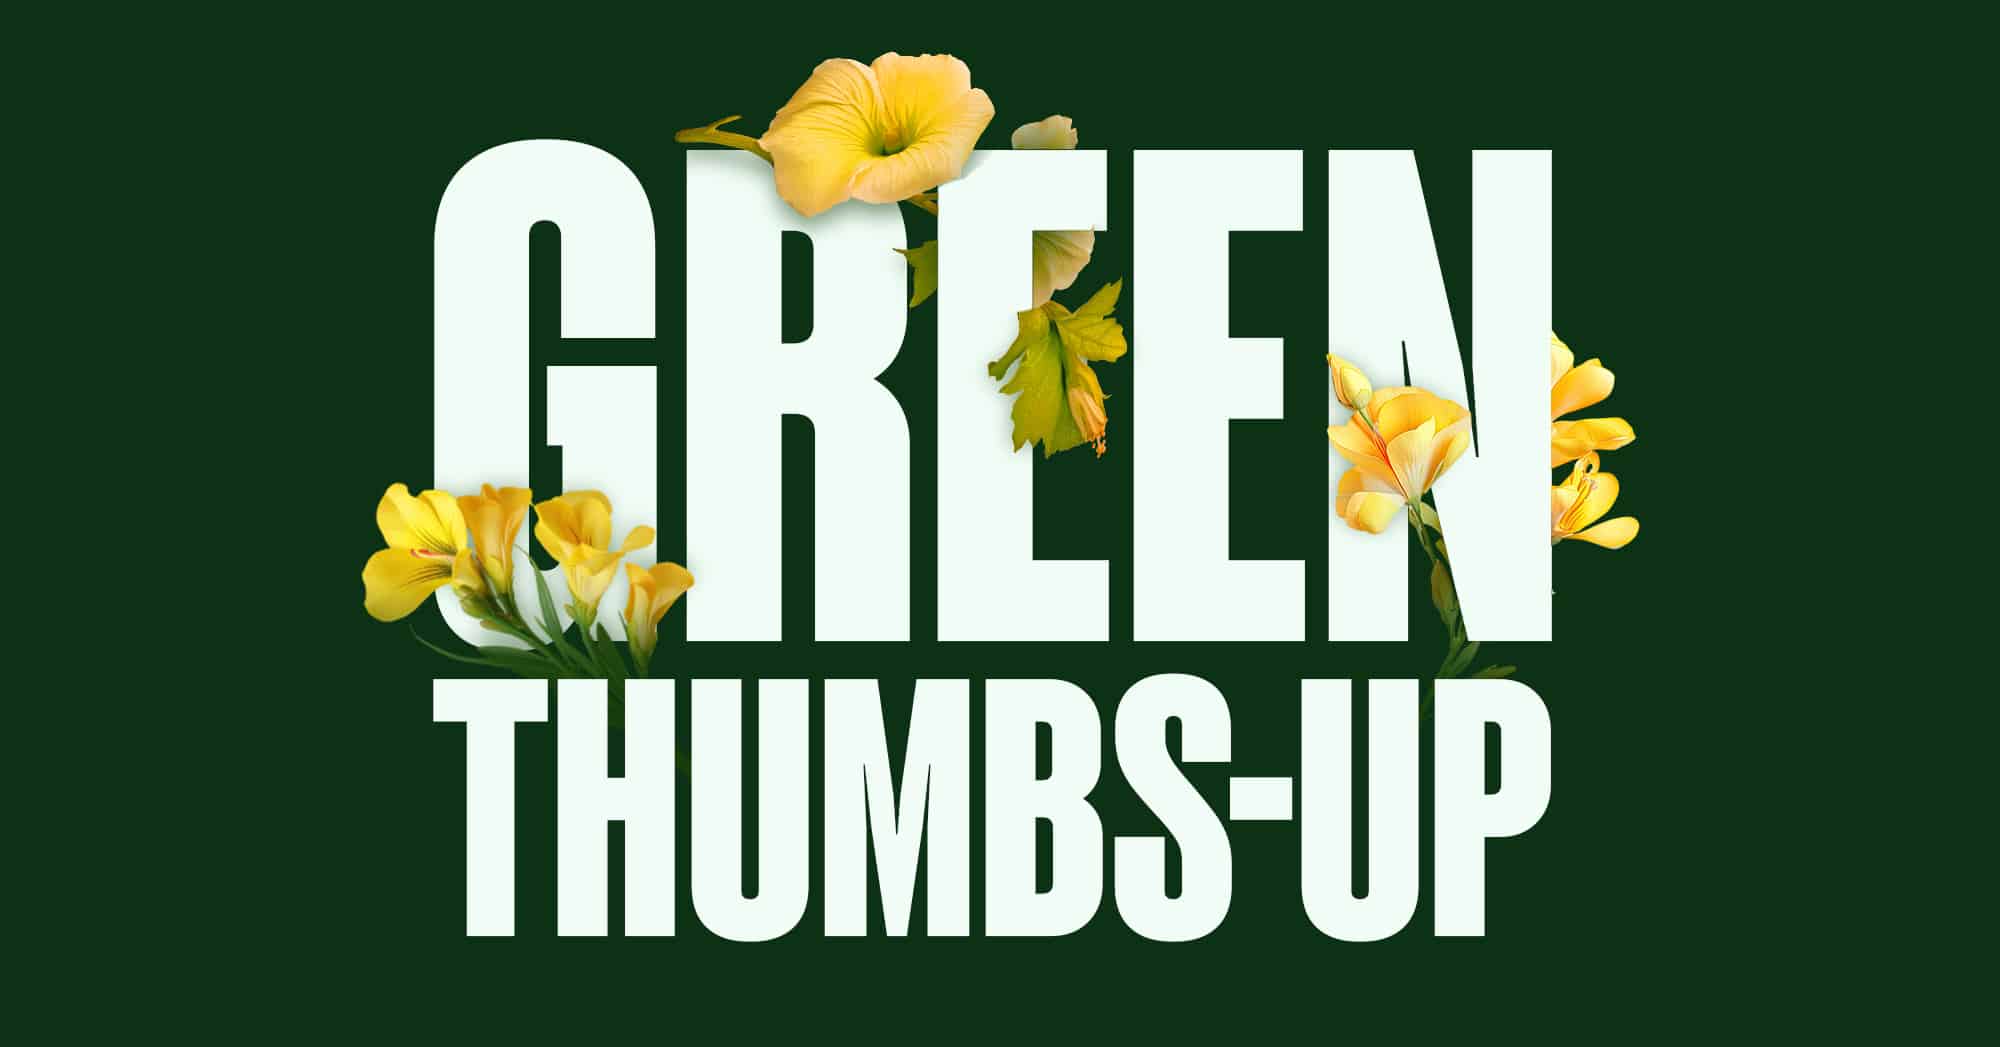 Green Thumbs-Up graphic with yellow flowers